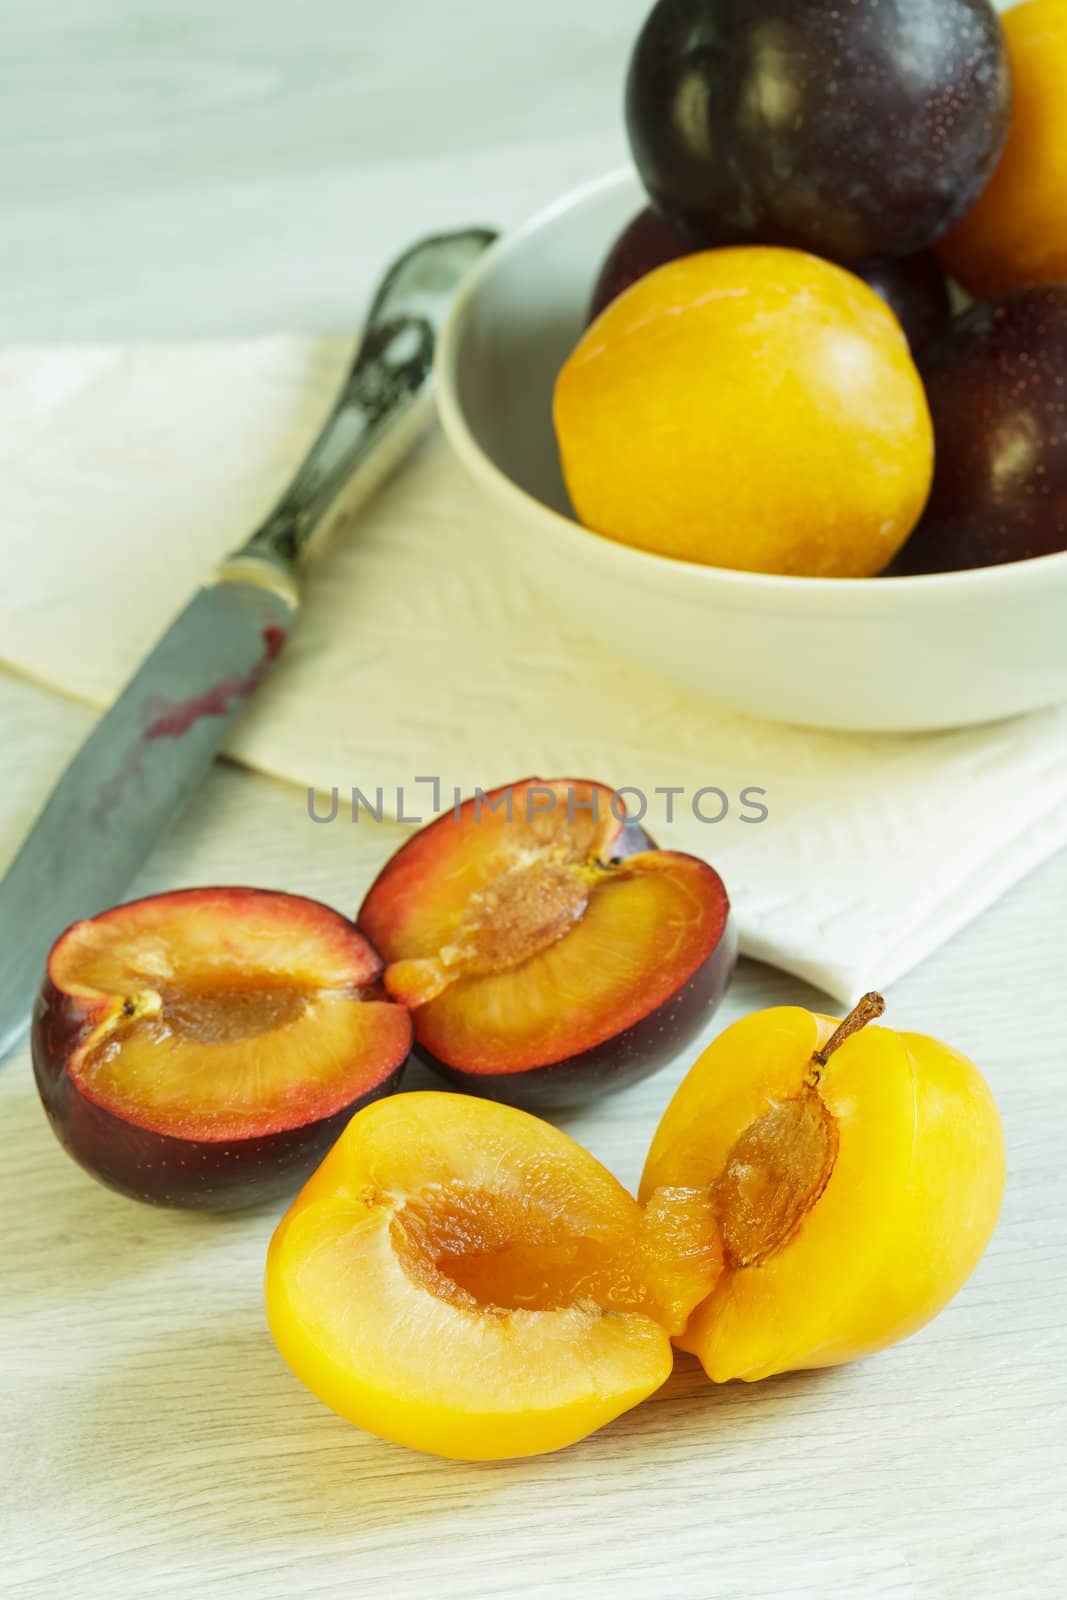 Two cuted different varieties of ripe plums